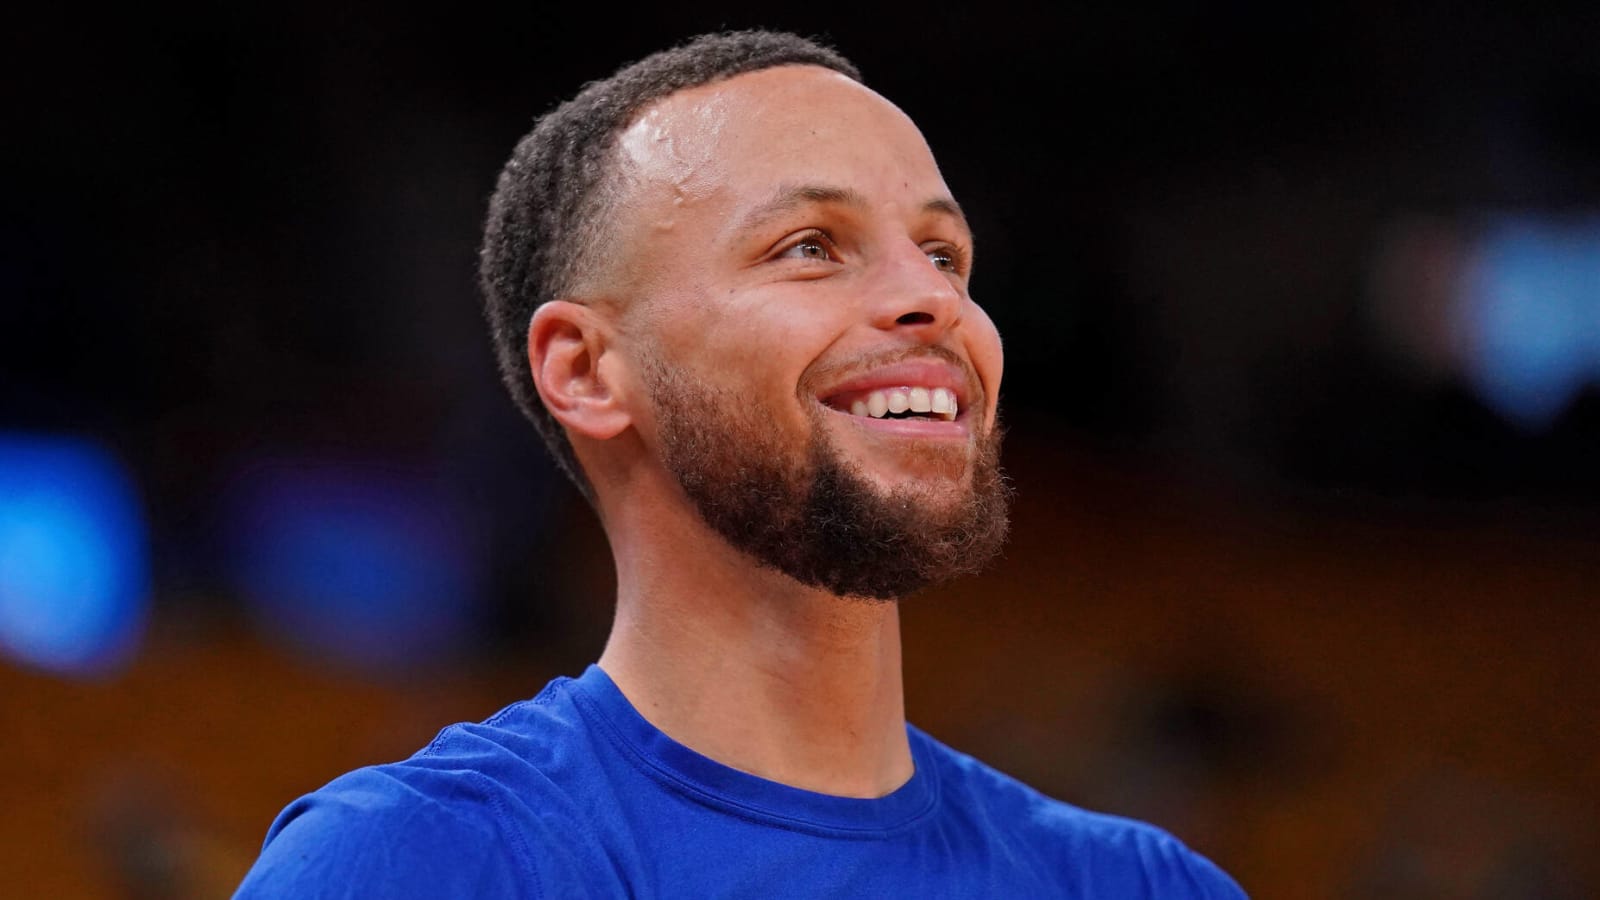 Watch: Steph Curry takes jab at LeBron James at ESPYs